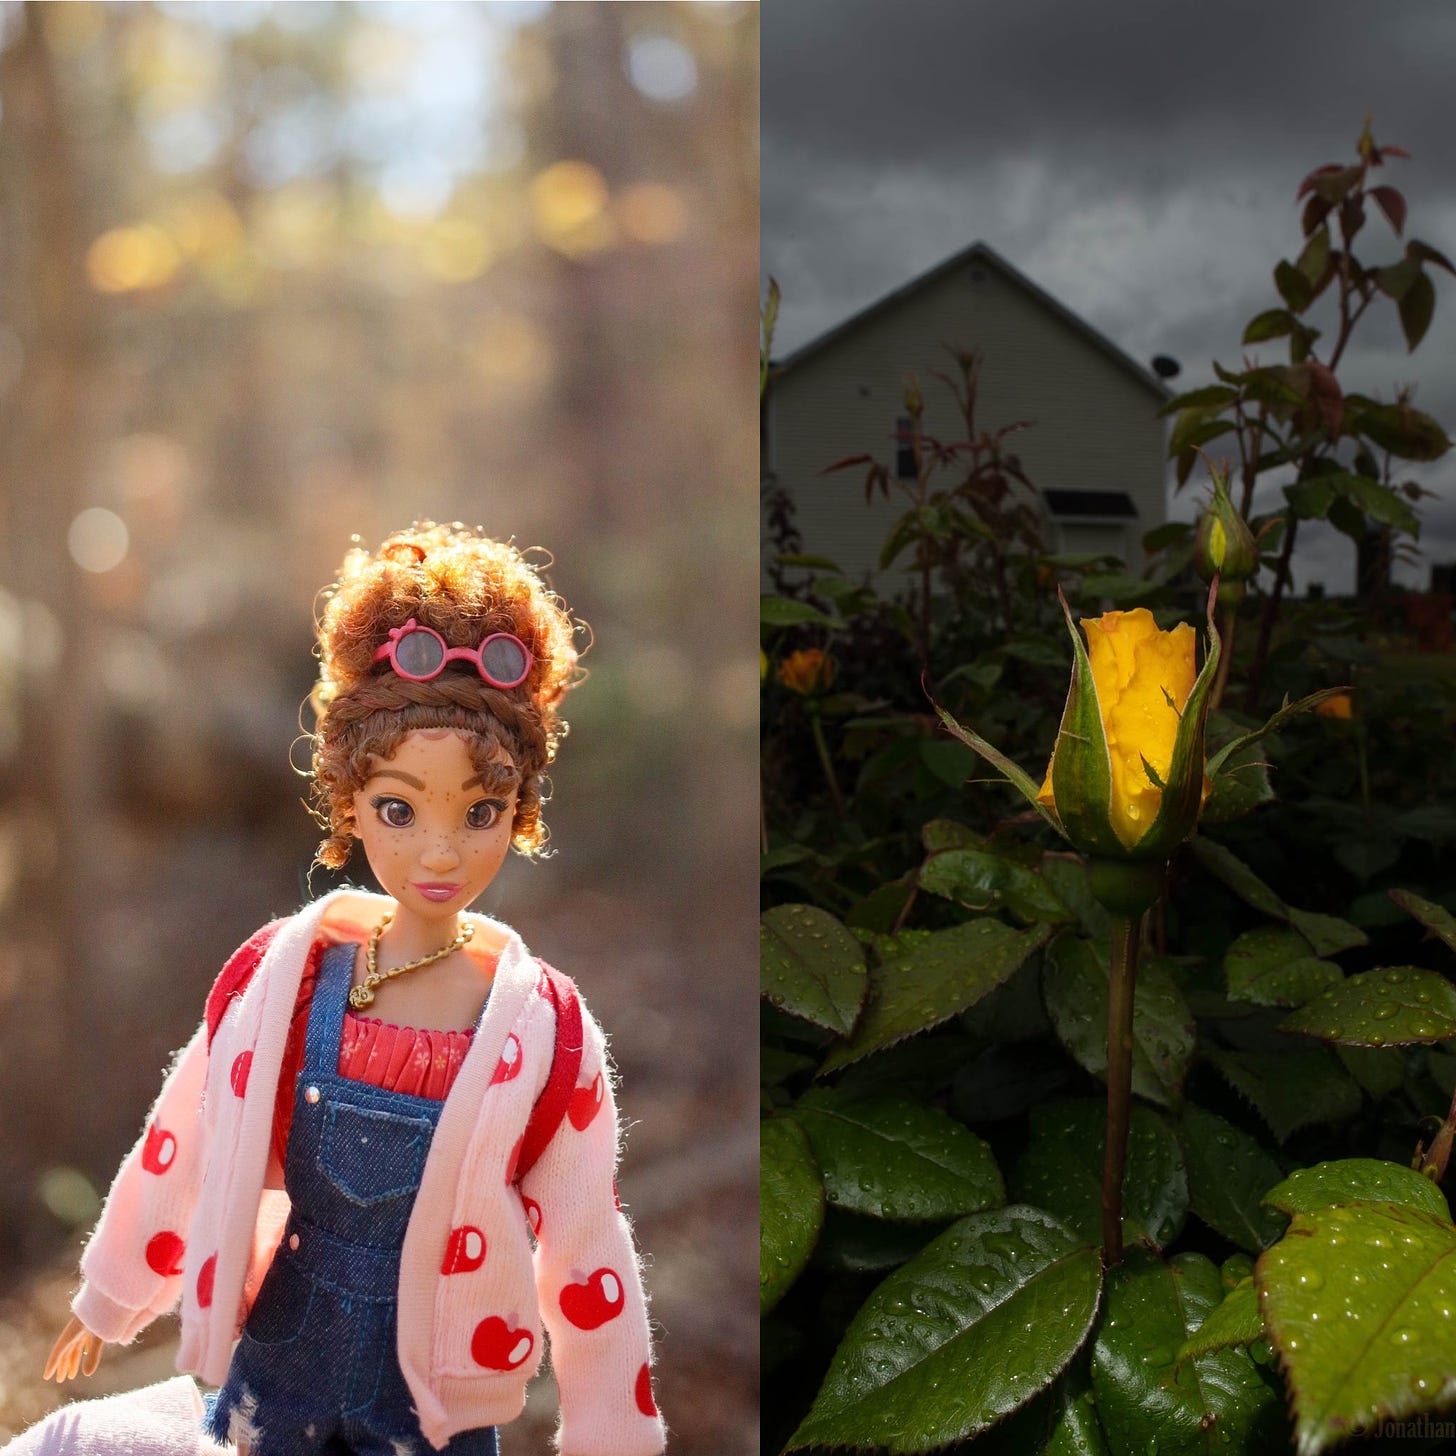 on the left, a doll outside on a sunny day. on the right a yellow rose in a garden